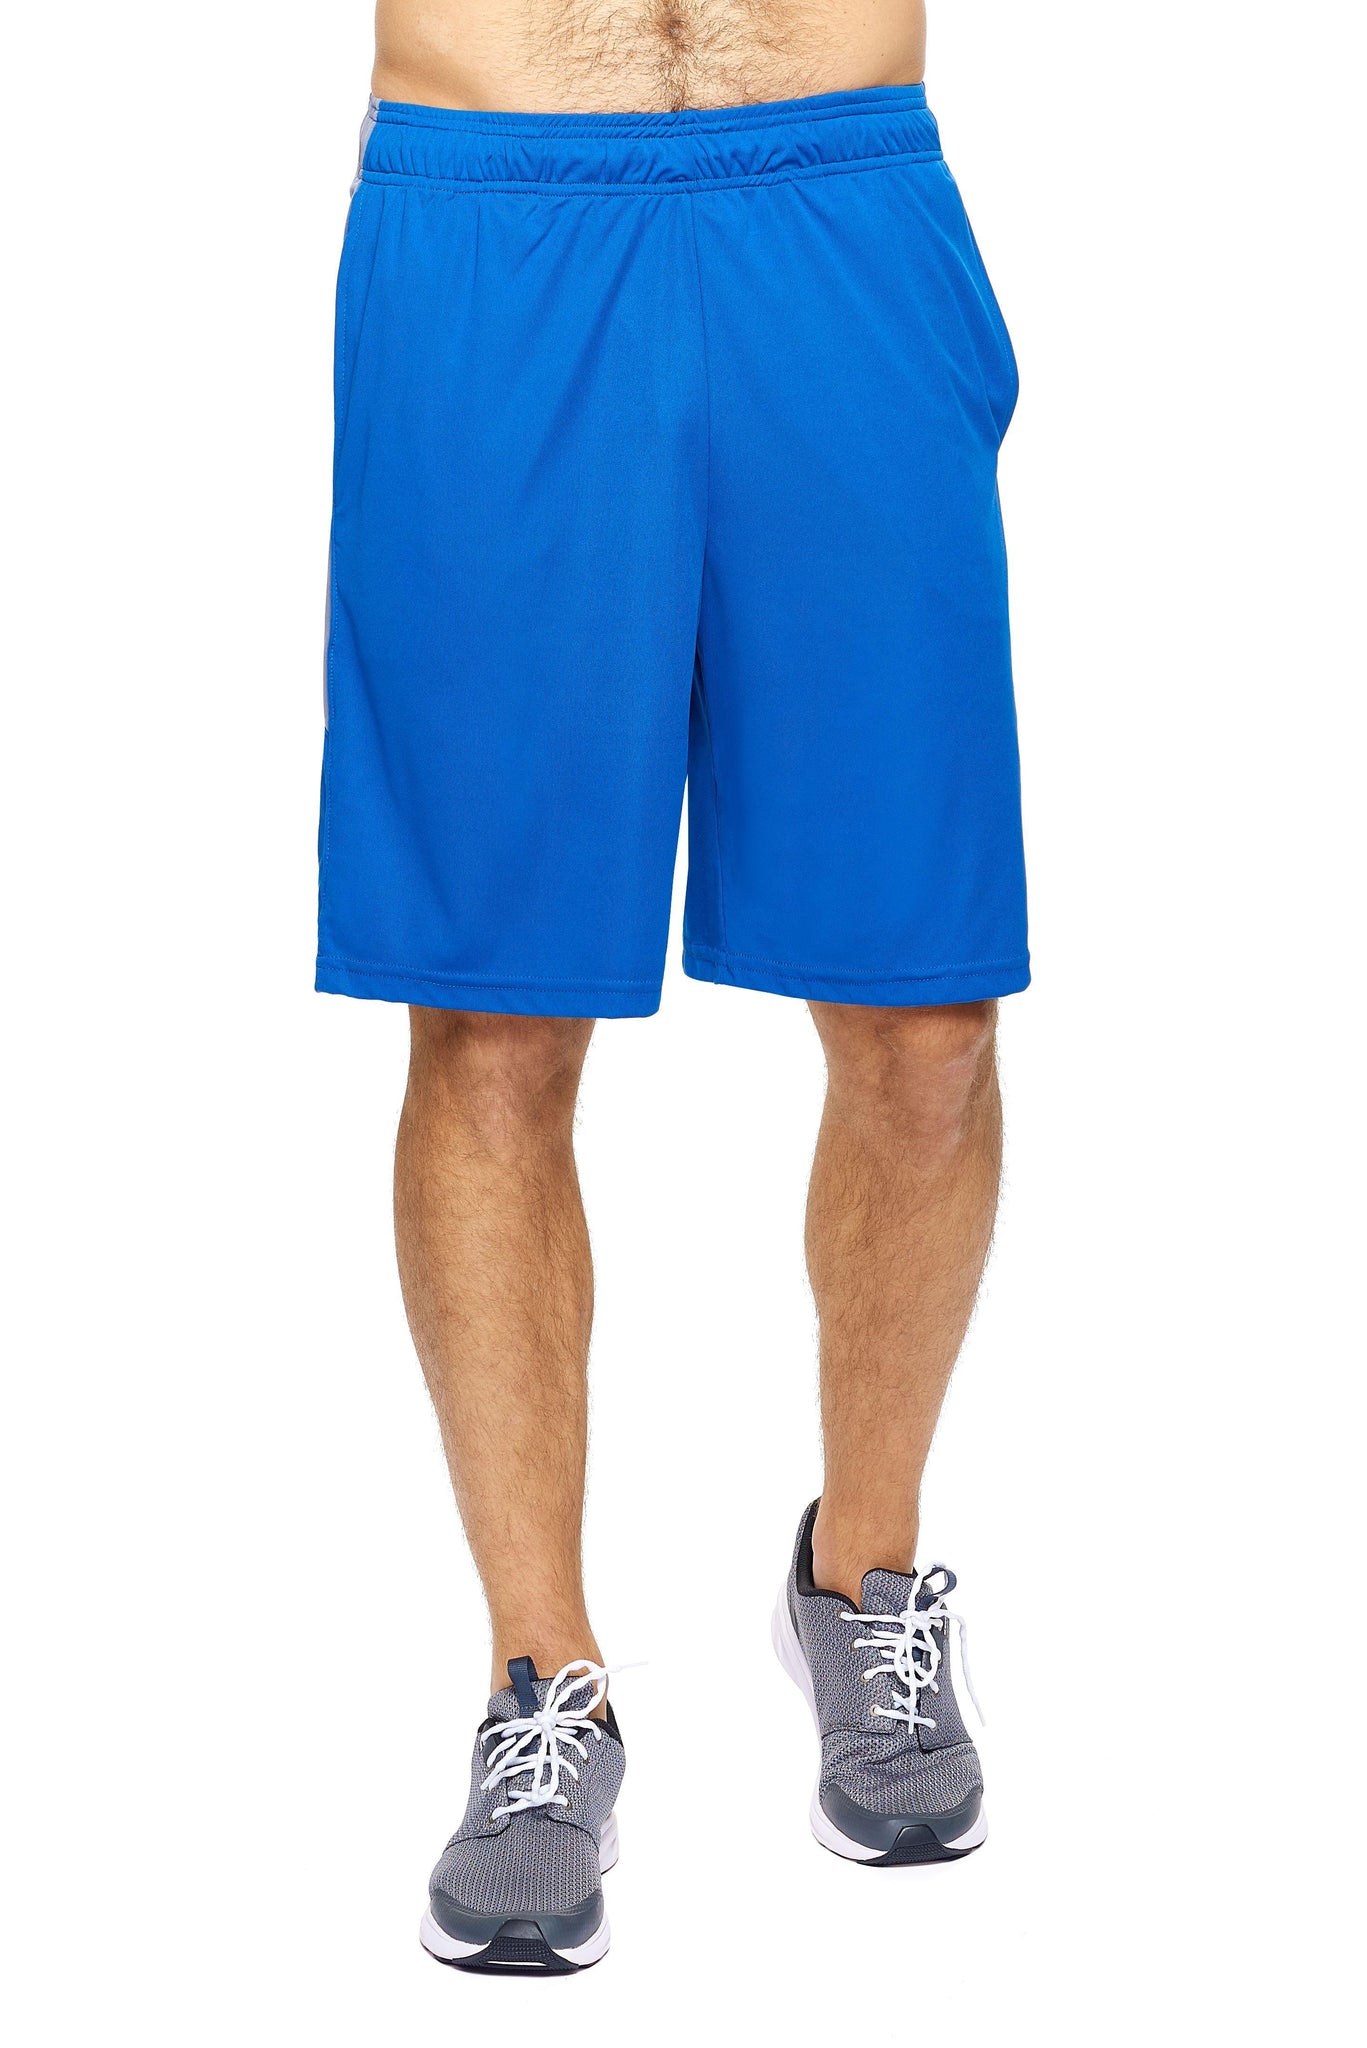 Expert Brand Wholesale Men's DriMax Outdoor SHorts Made in USA AI1087 image 3#royal